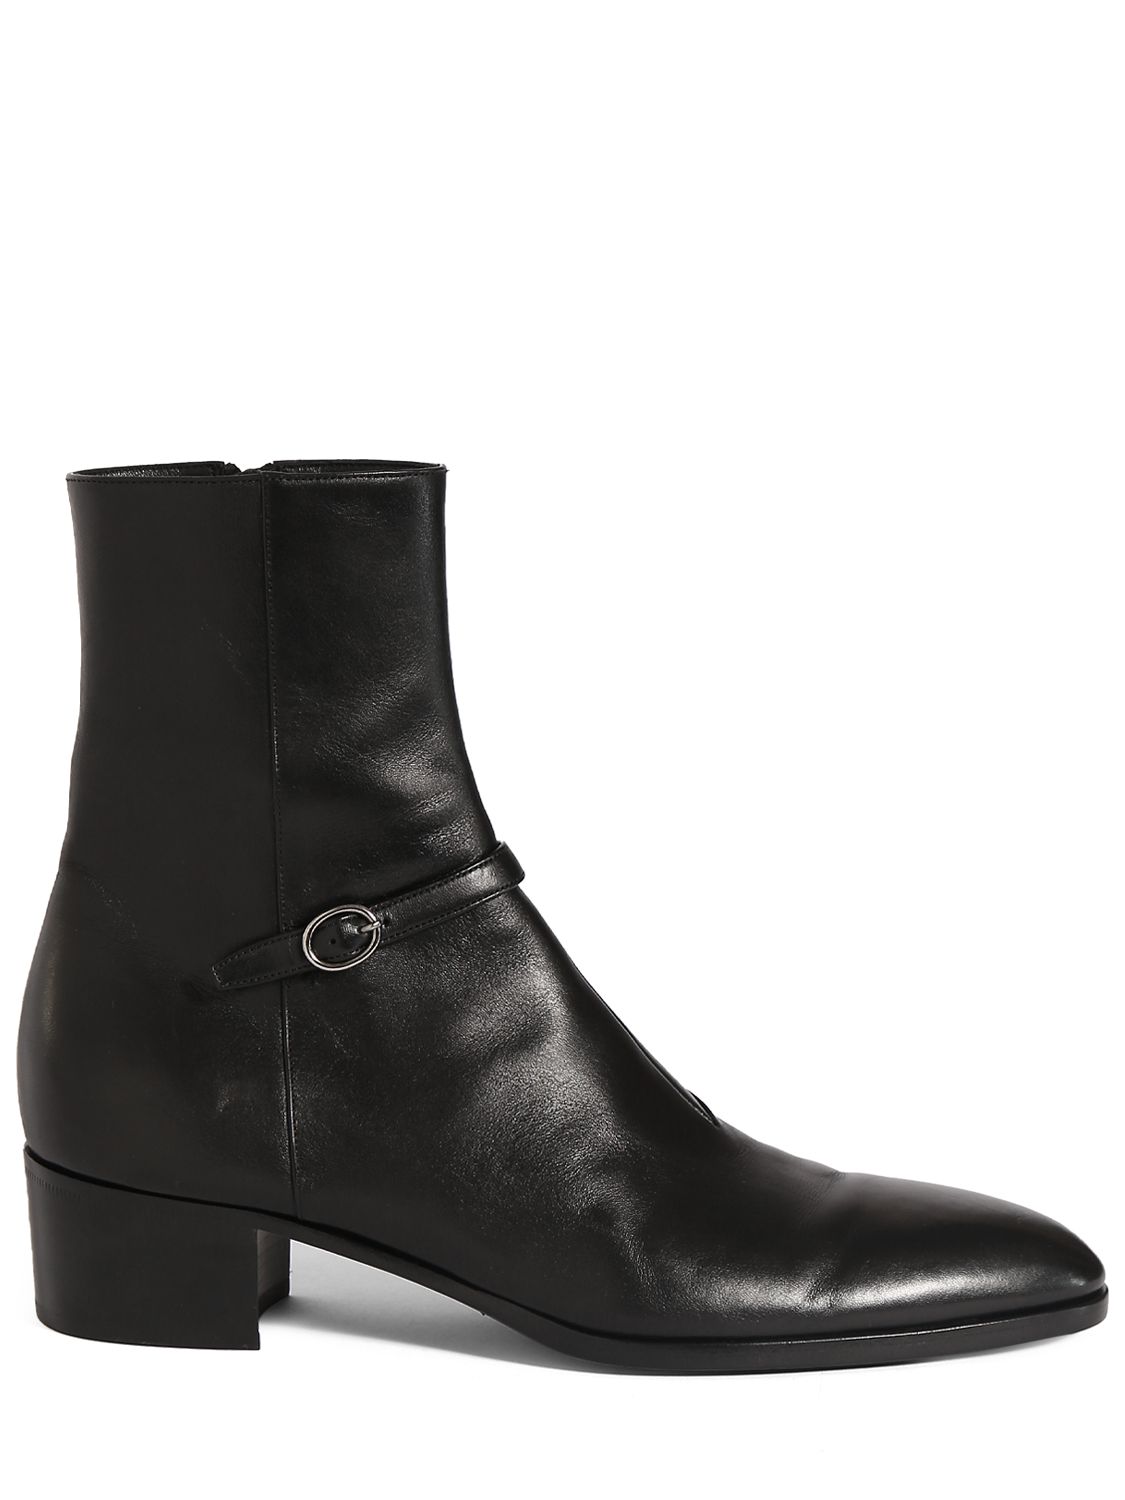 Vlad 45 Zipped Leather Boots